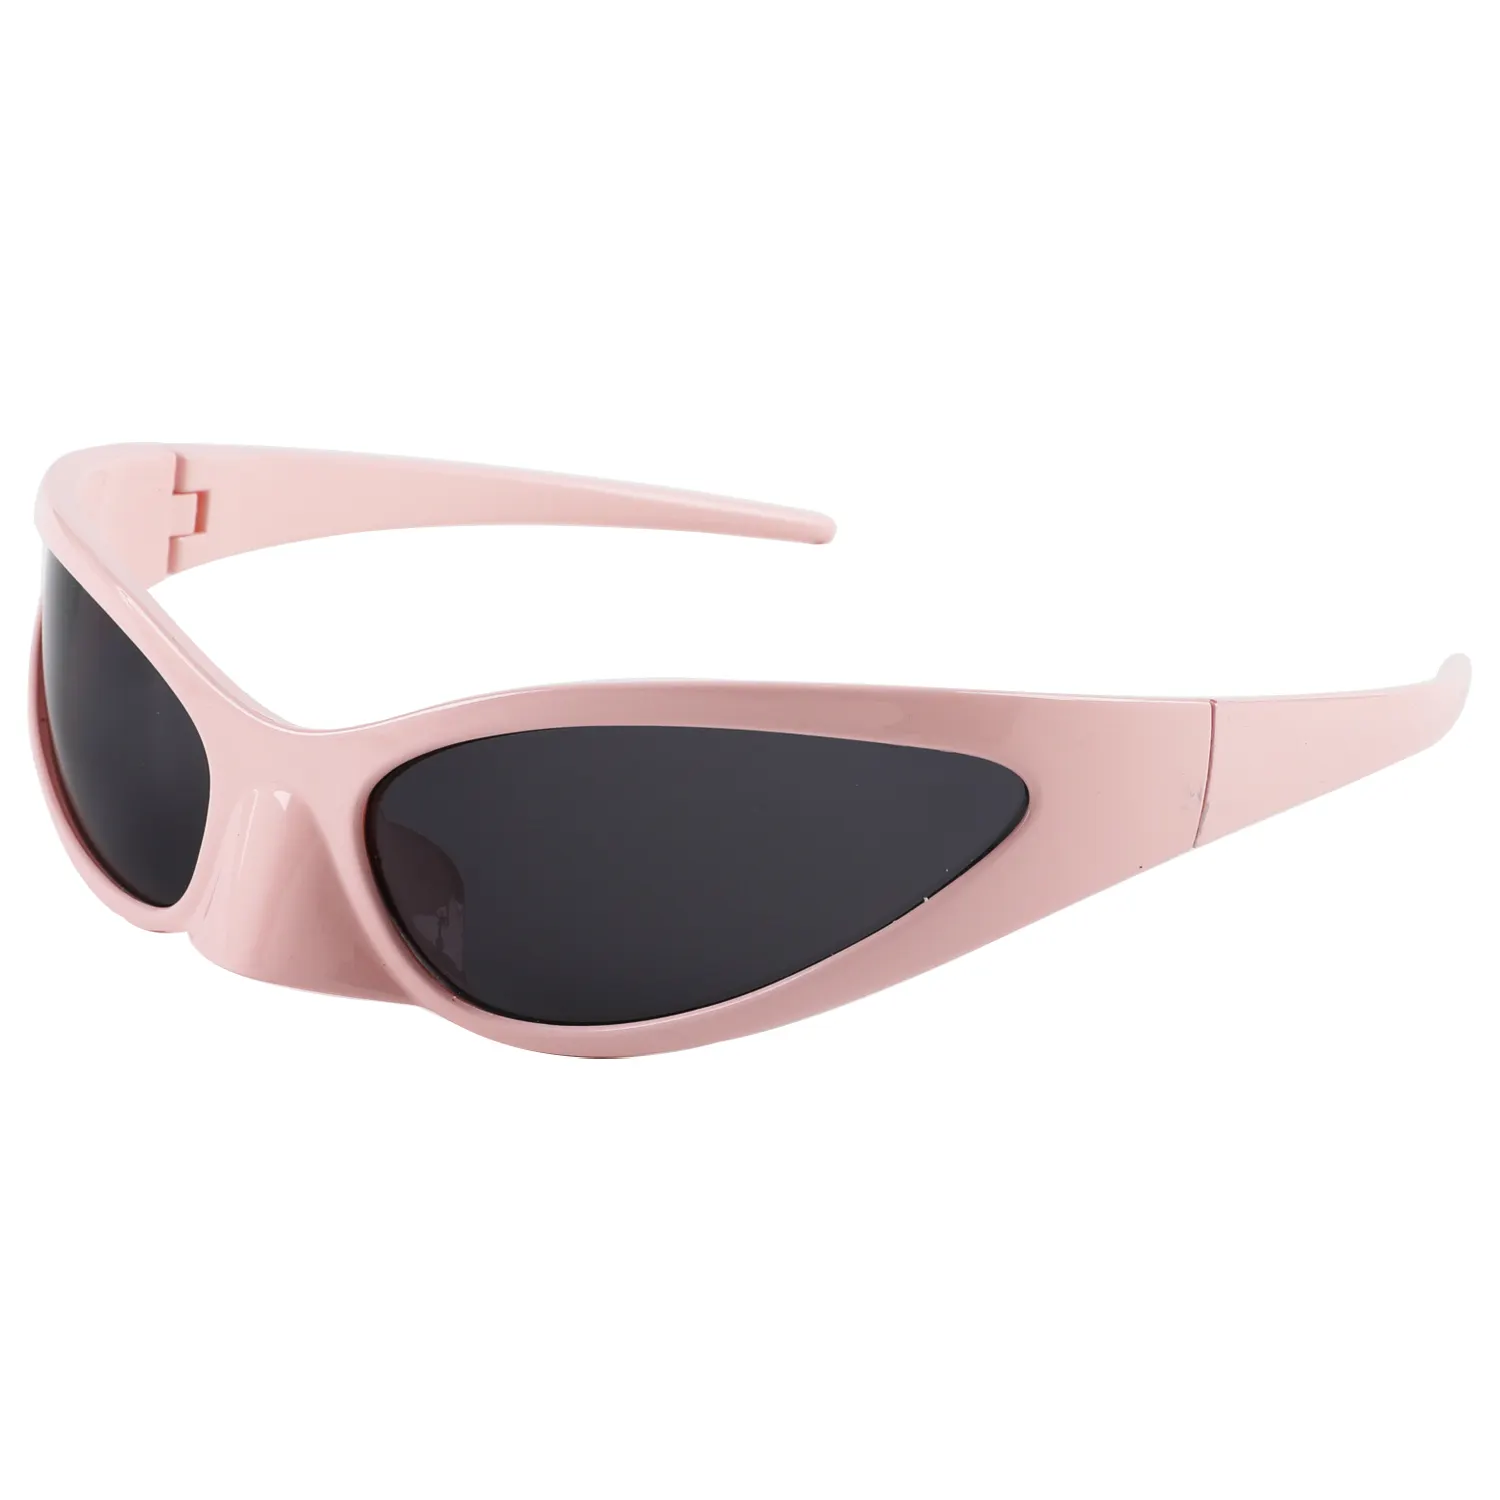 Futuristic sunglasses for men European and American Spice Girls super cool street photo glasses for women cycling sunglasses